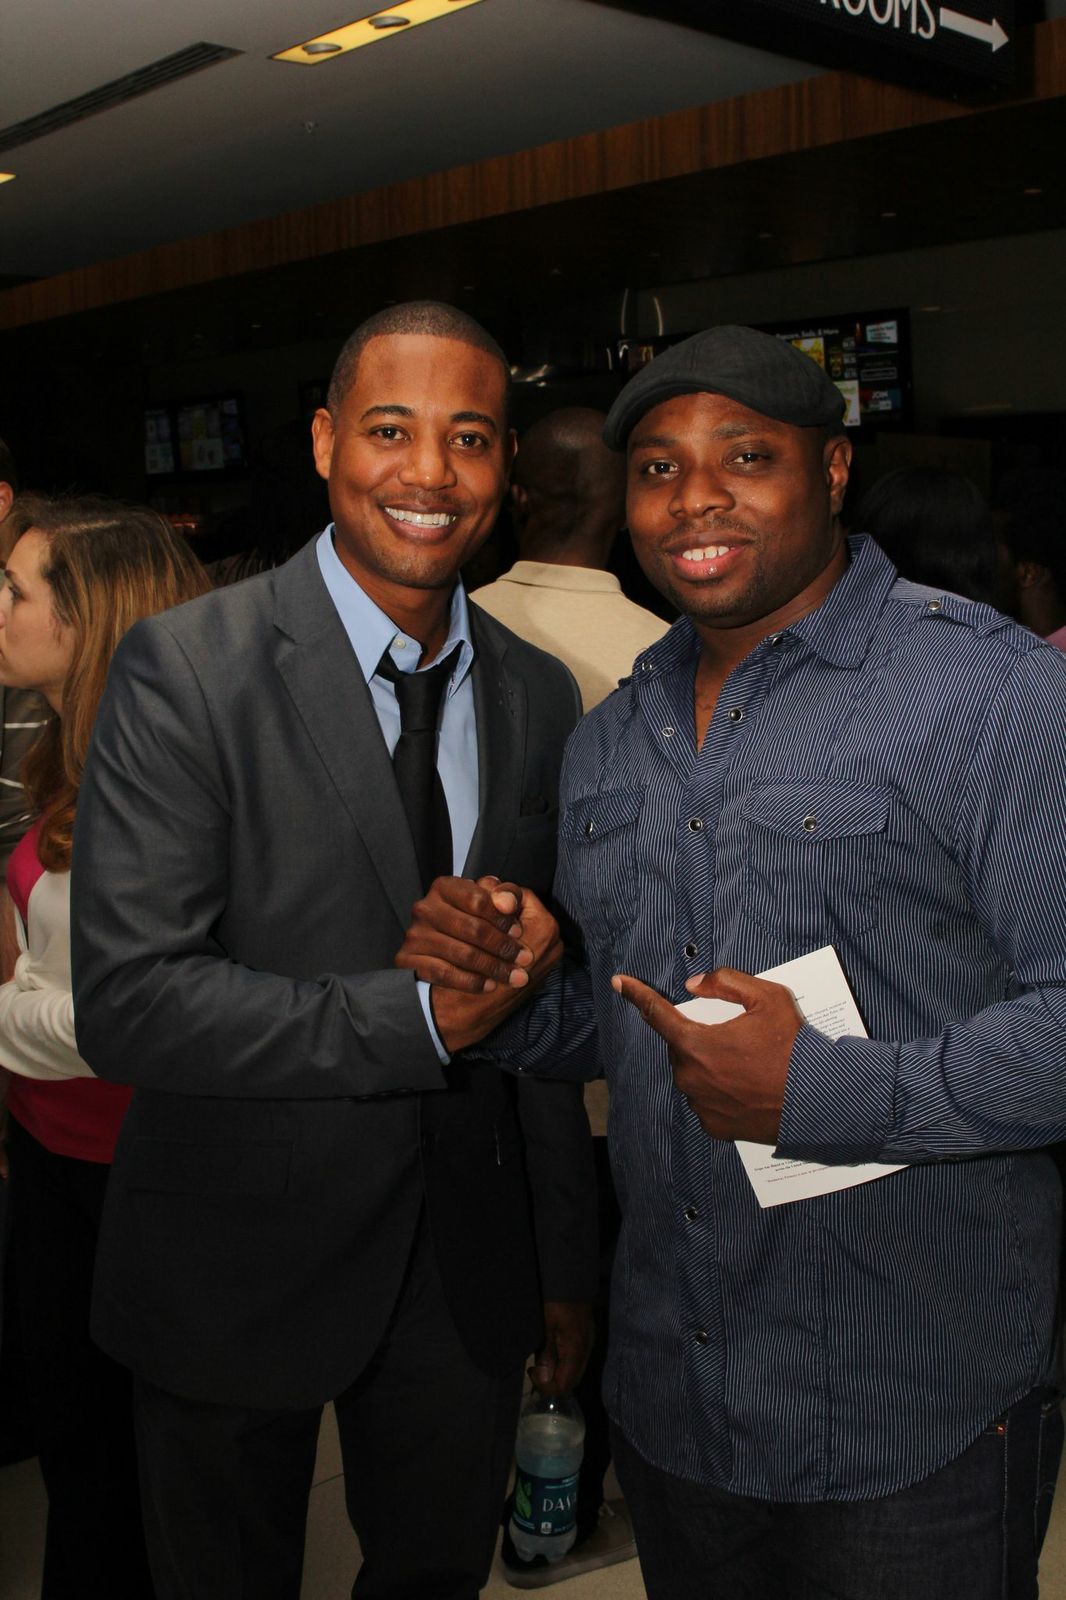 Derrex Brady and Page Kennedy at the 2013 Los Angeles screening of The Championship Rounds film.